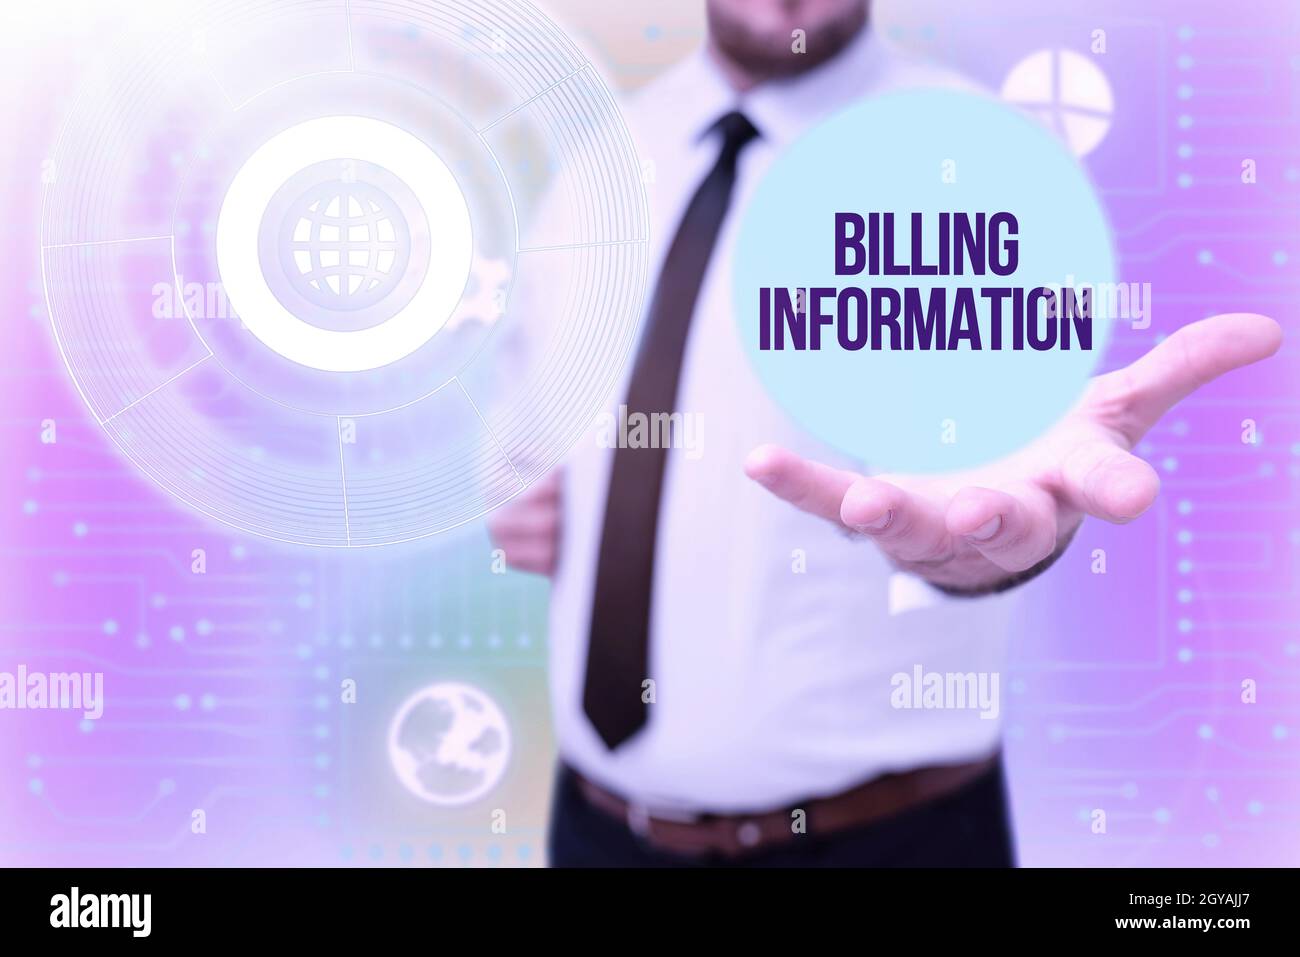 Text caption presenting Billing Information, Business overview address connected to a specific form of payment Gentelman Uniform Standing Holding New Stock Photo